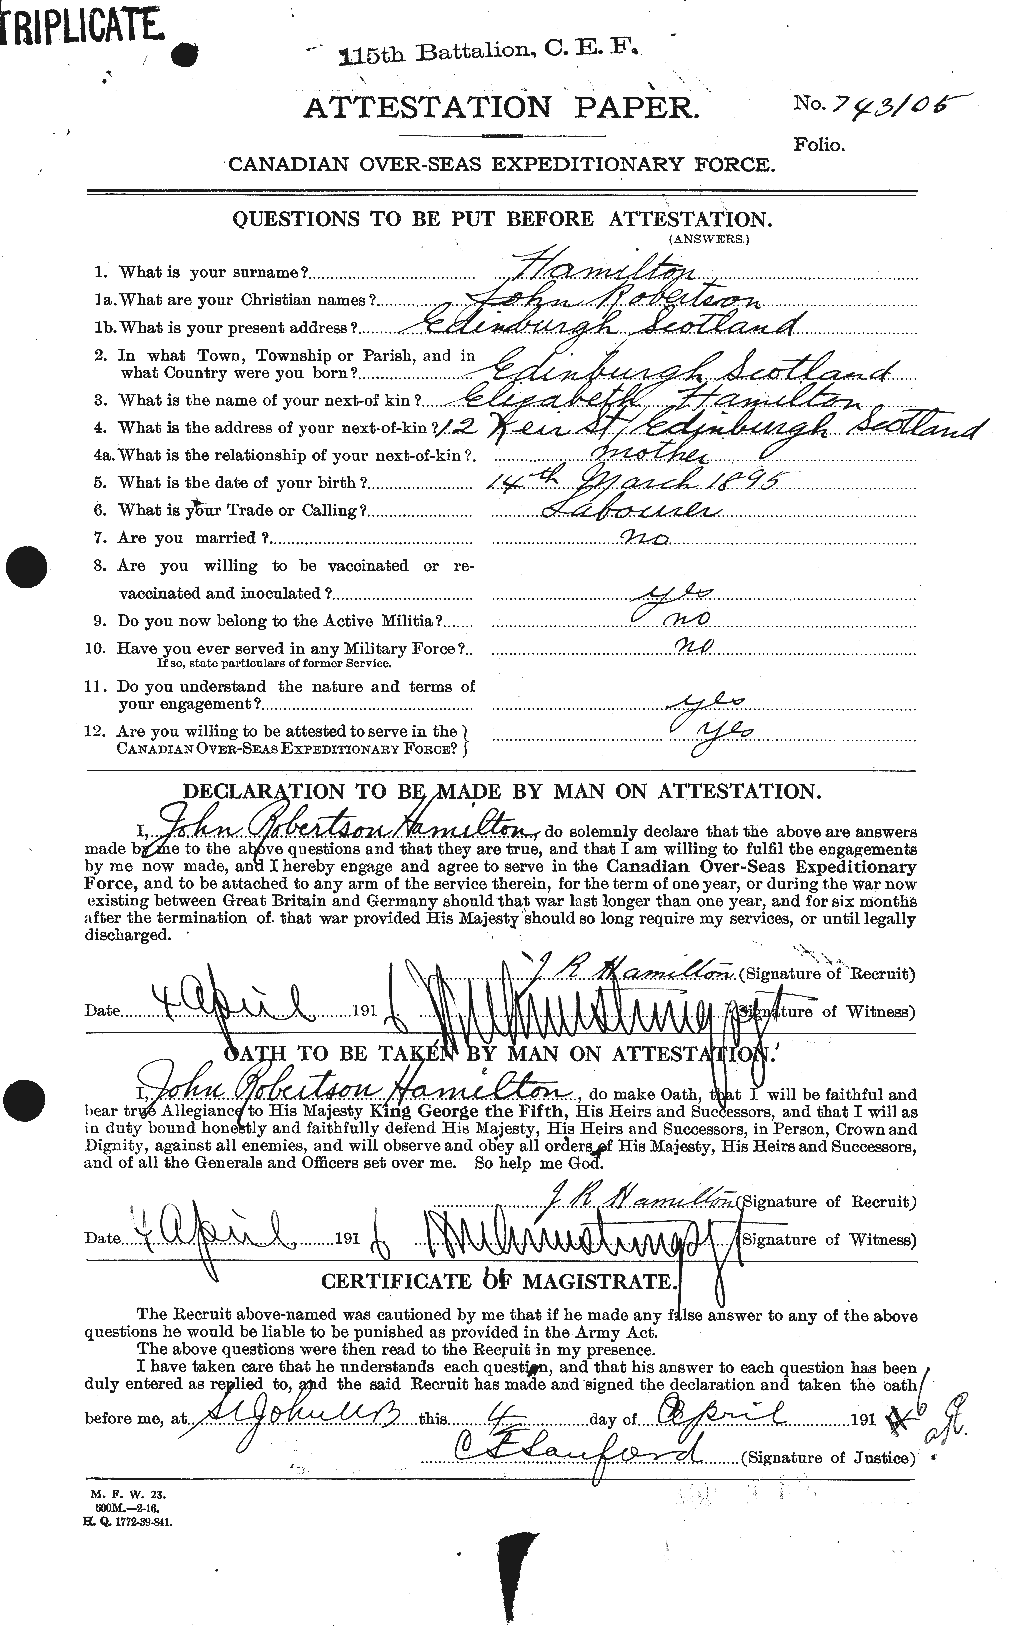 Personnel Records of the First World War - CEF 373117a